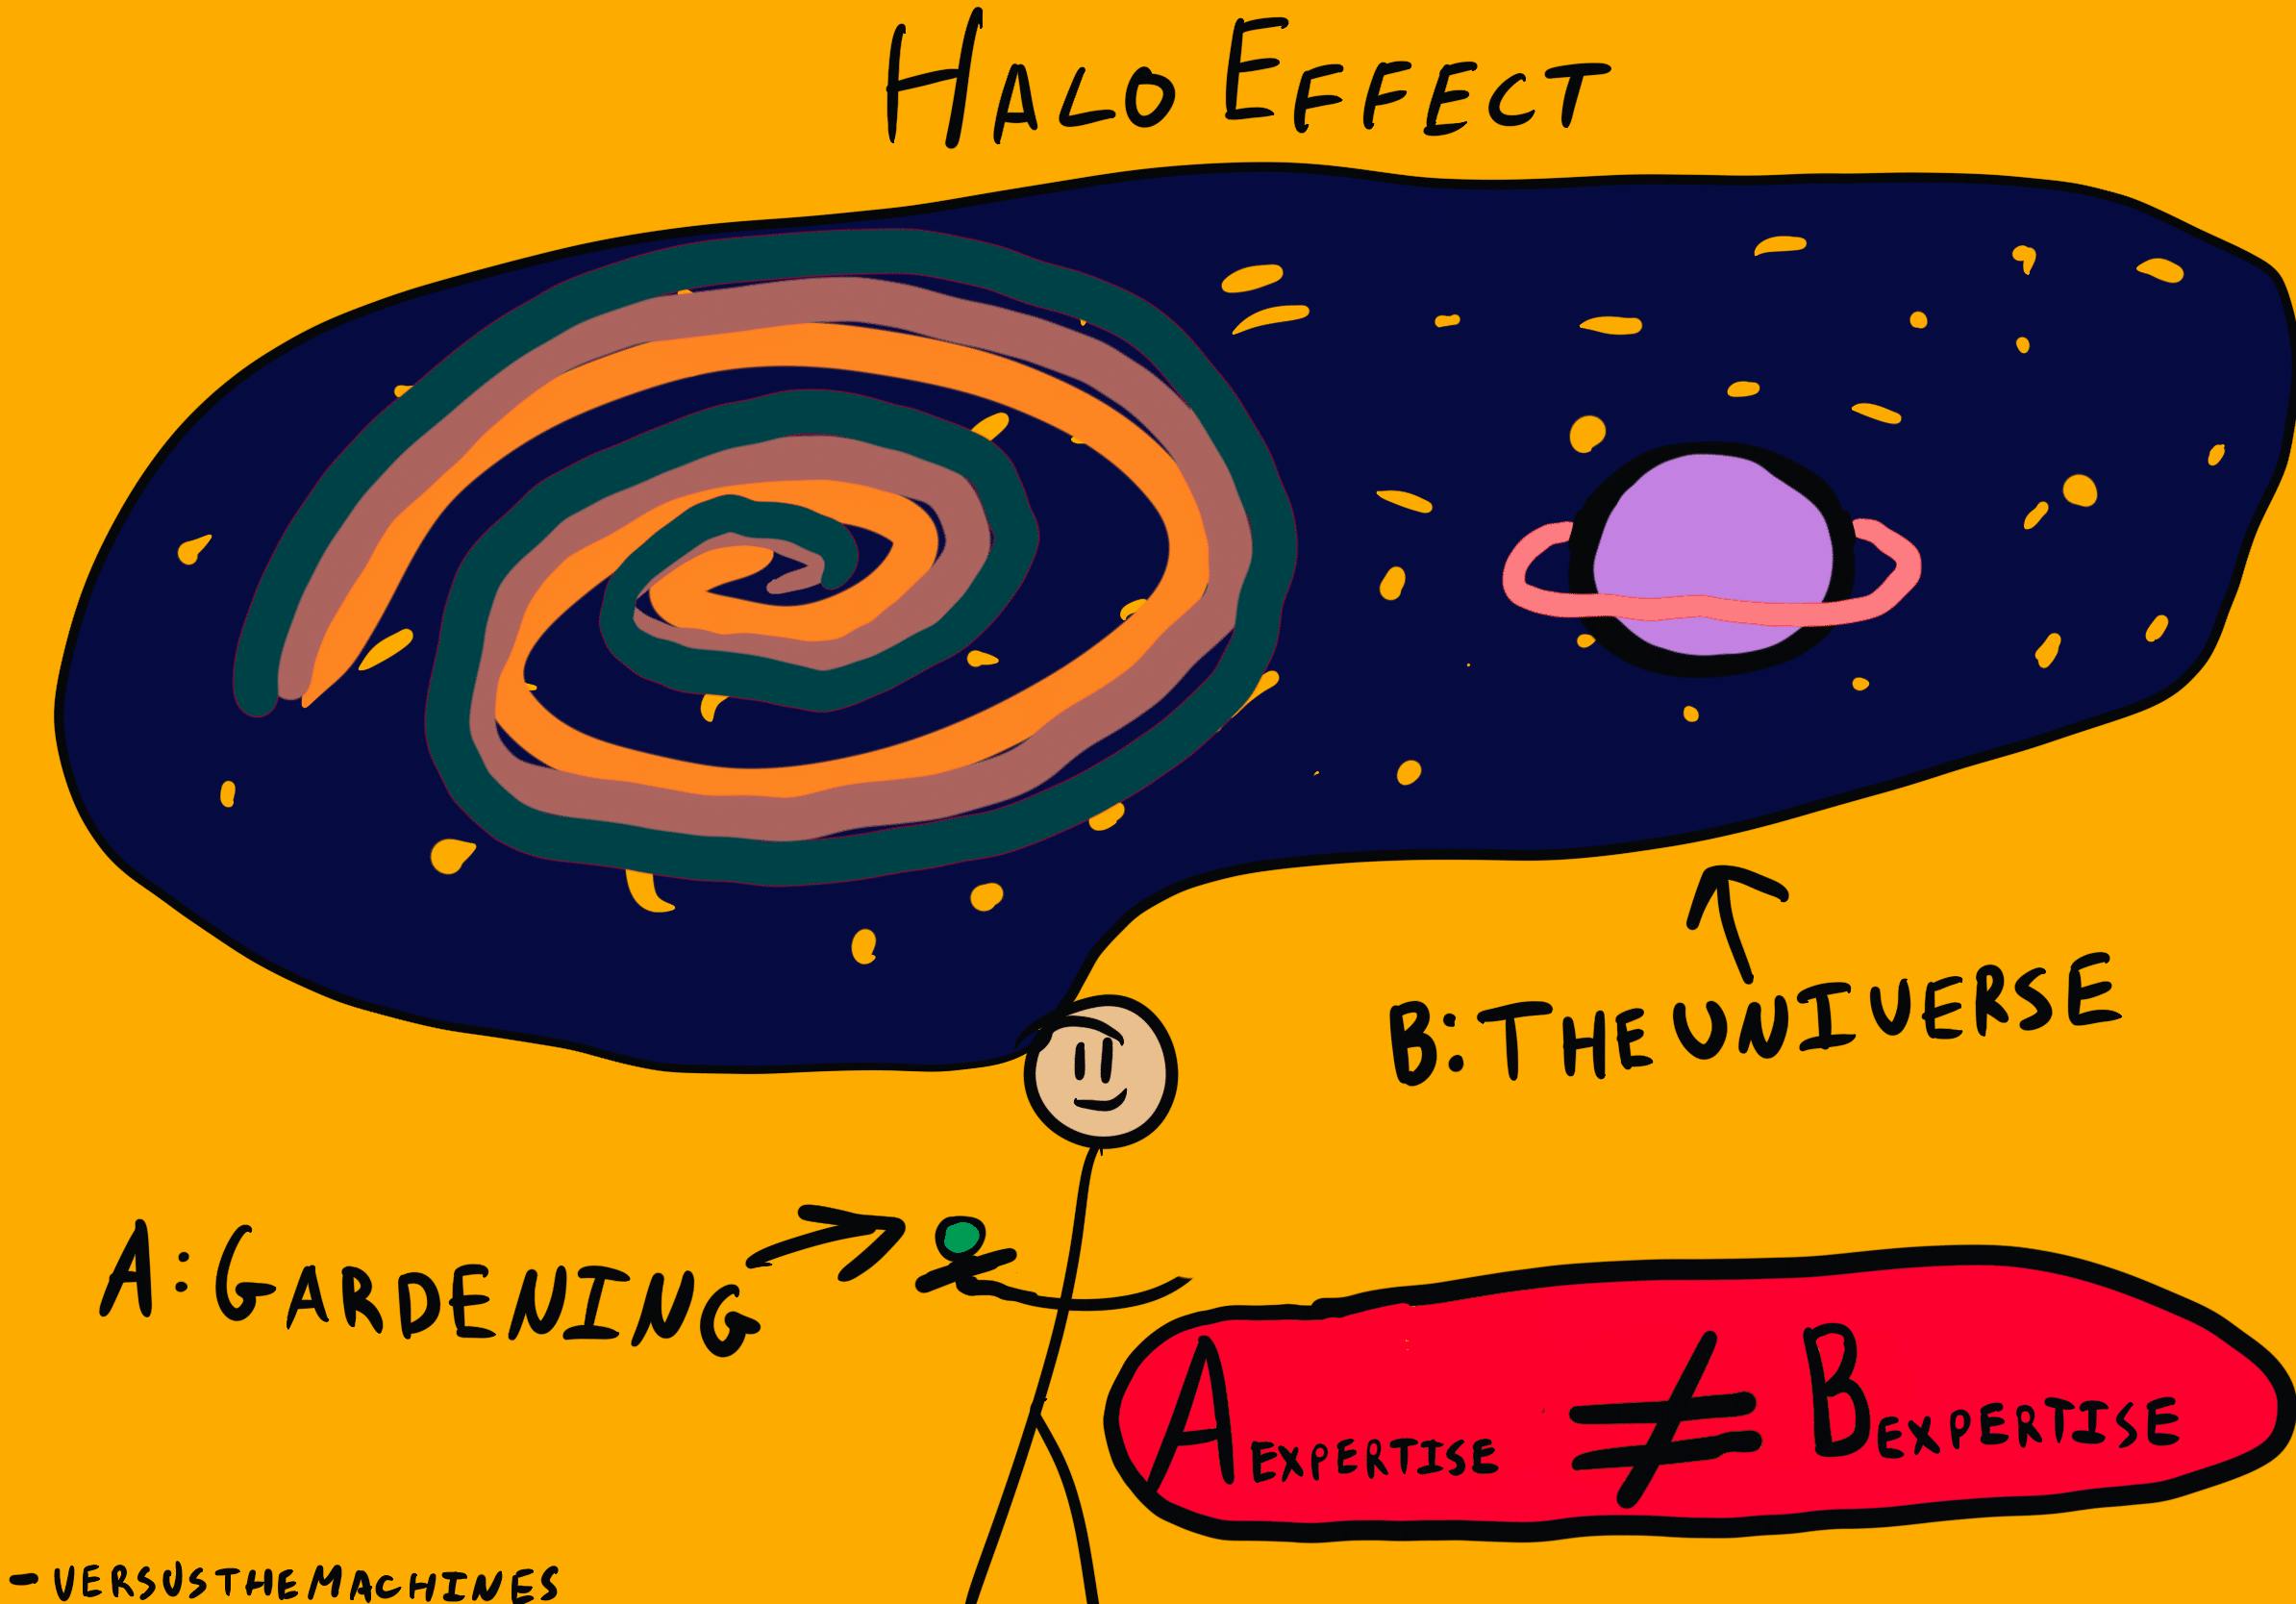 Halo effect - The Decision Lab